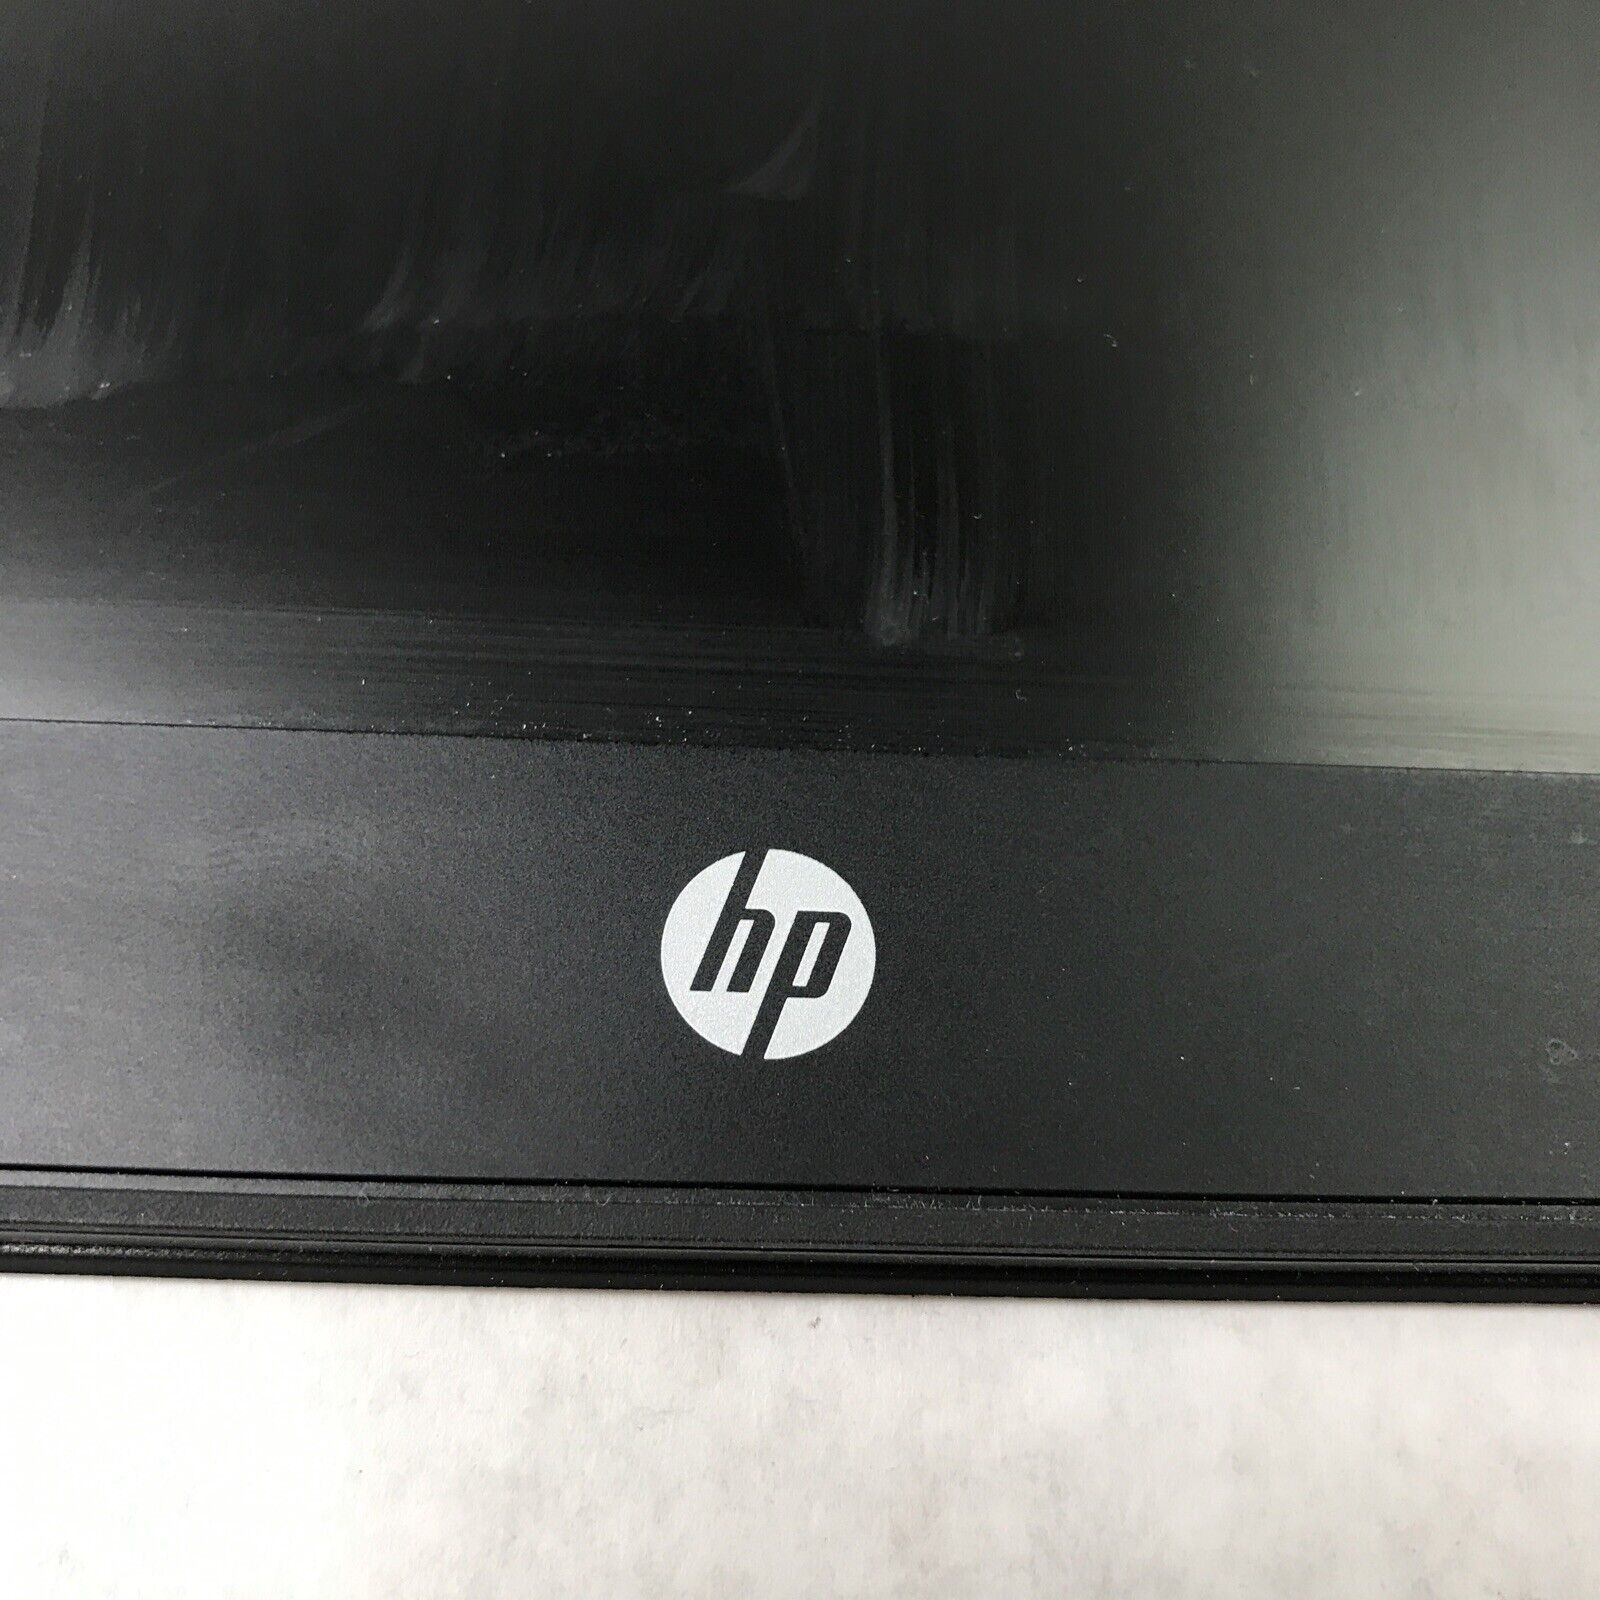 HP ProBook G50G1 Laptop Screen (Tested and Working)